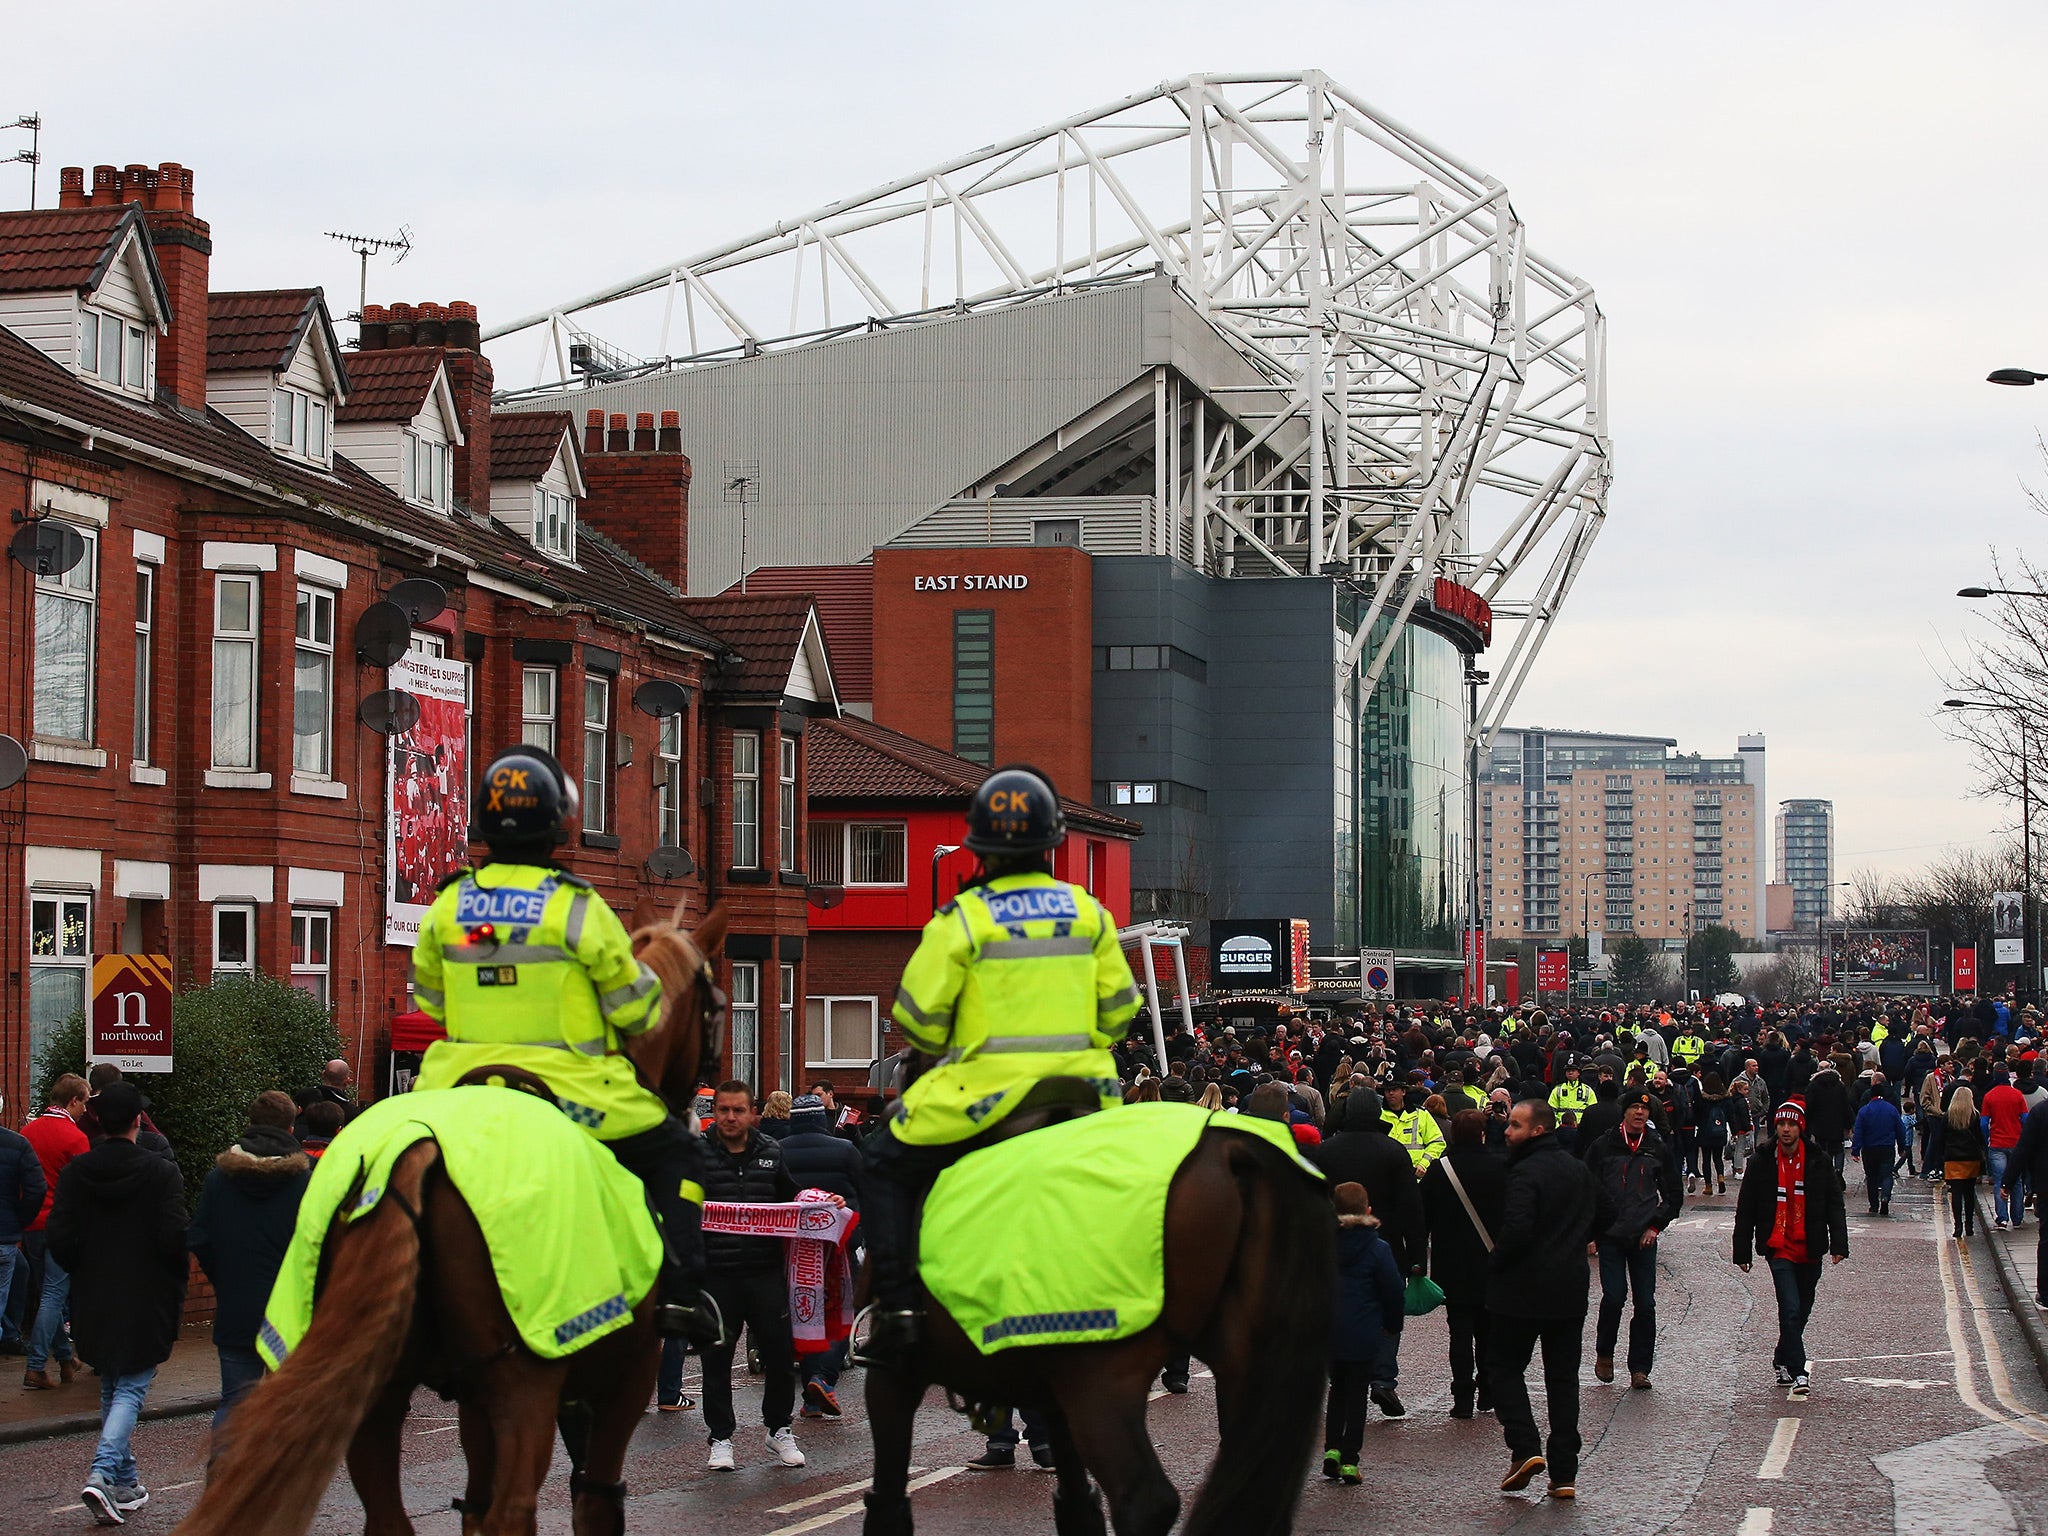 Fans can expect a strong police presence at Old Trafford for Sunday's game